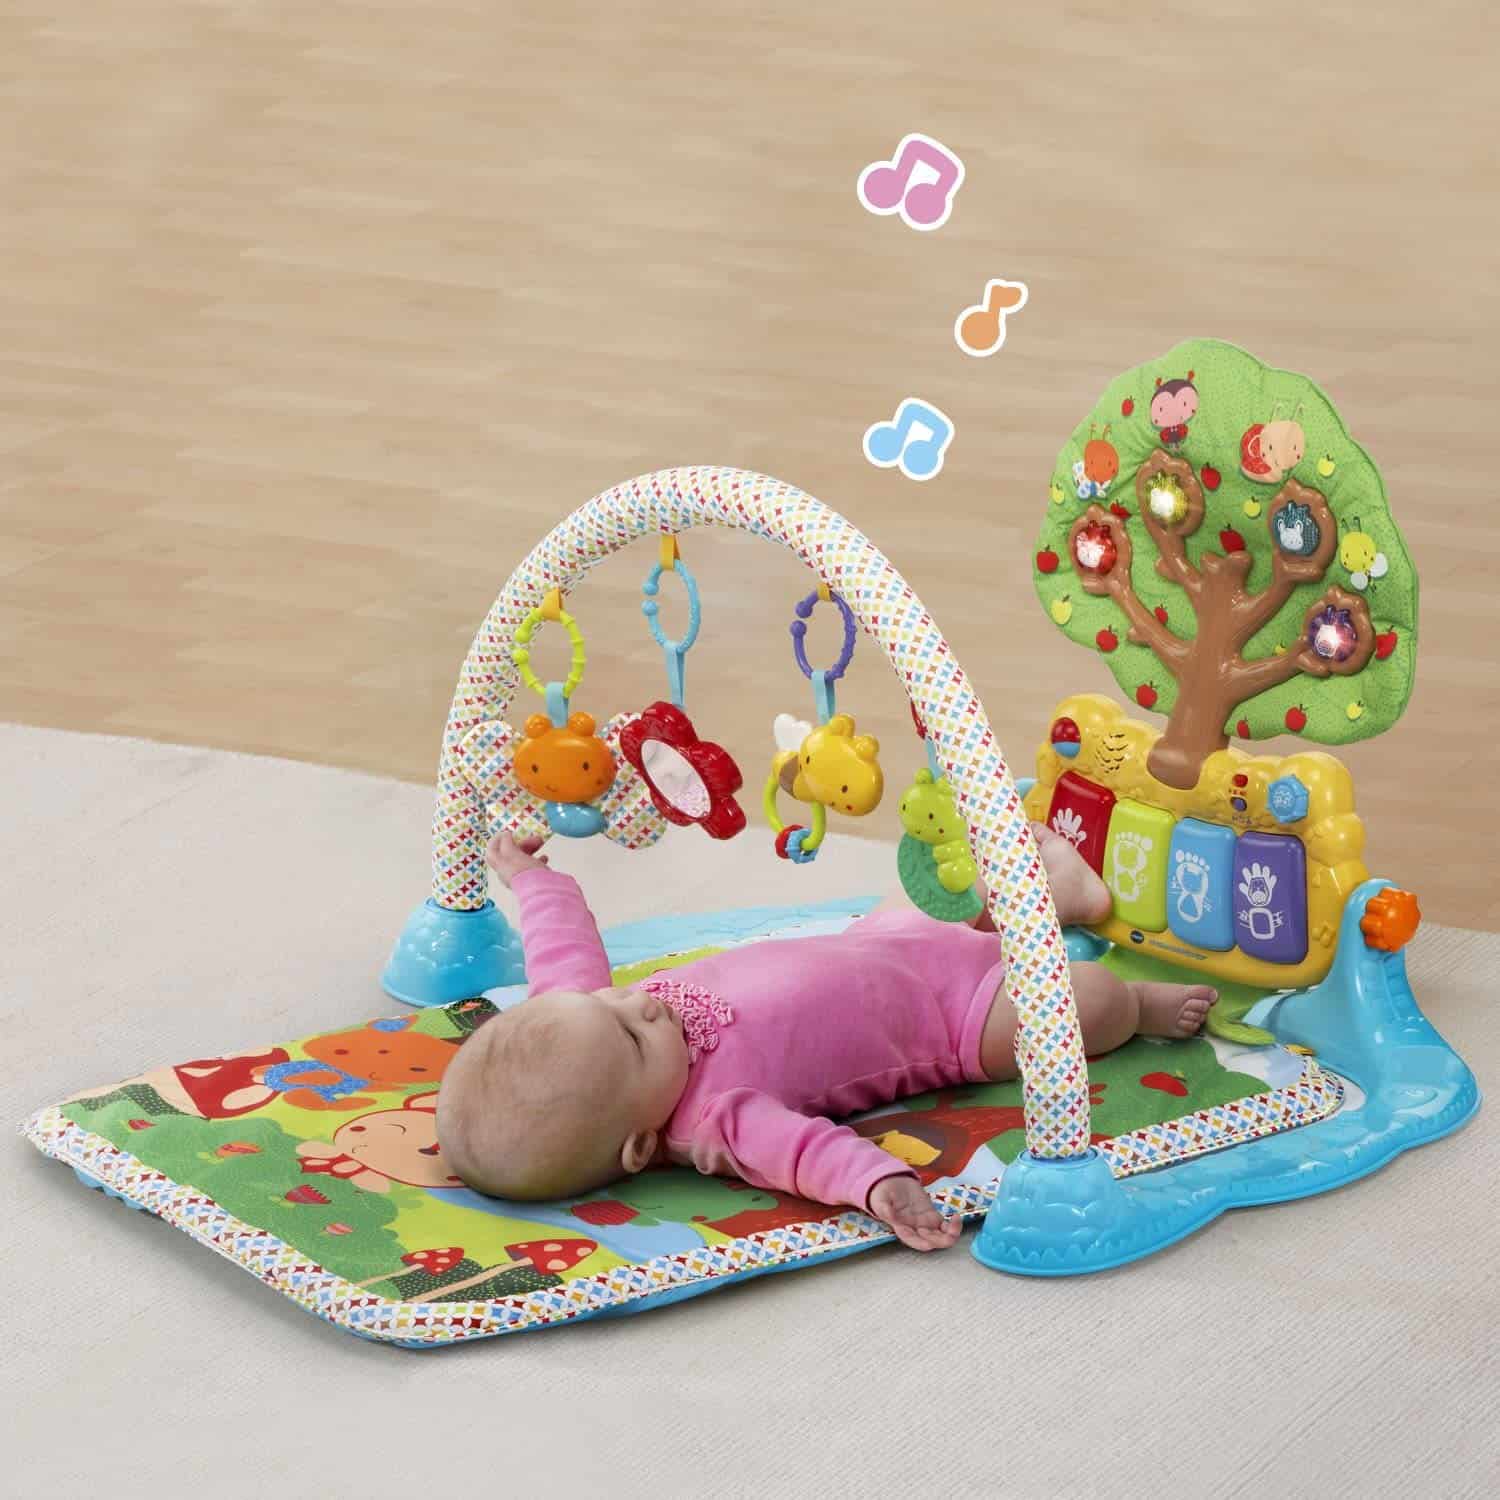 Cutest baby gym with foot pedals: Vtech Lil 'Critters